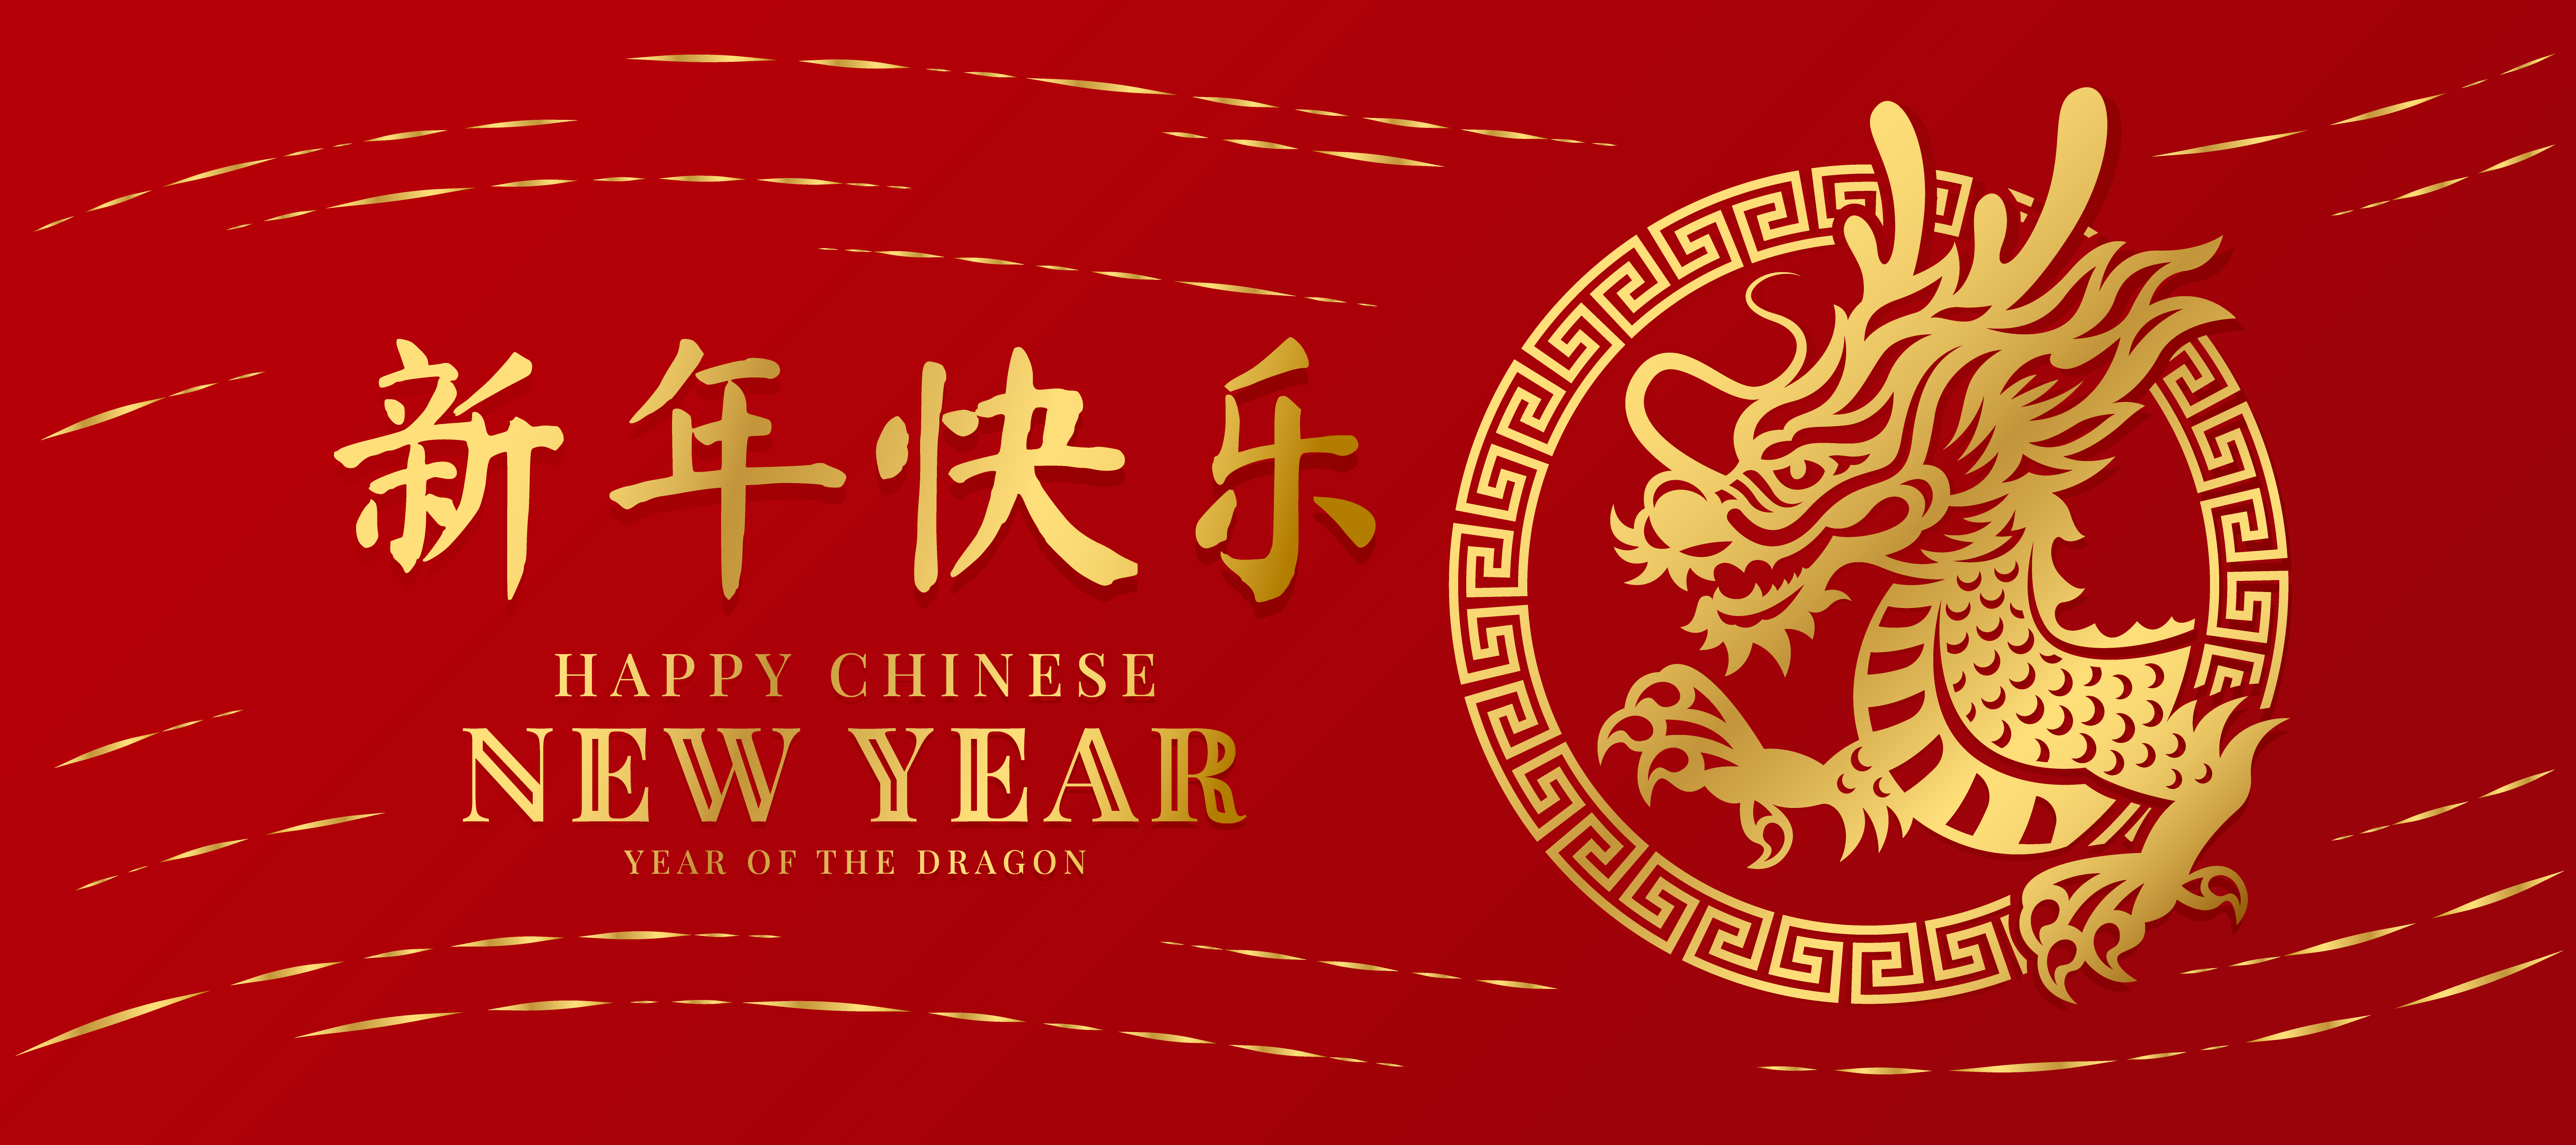 "Happy Chinese New Year" in gold font, and an illustration of a dragon.